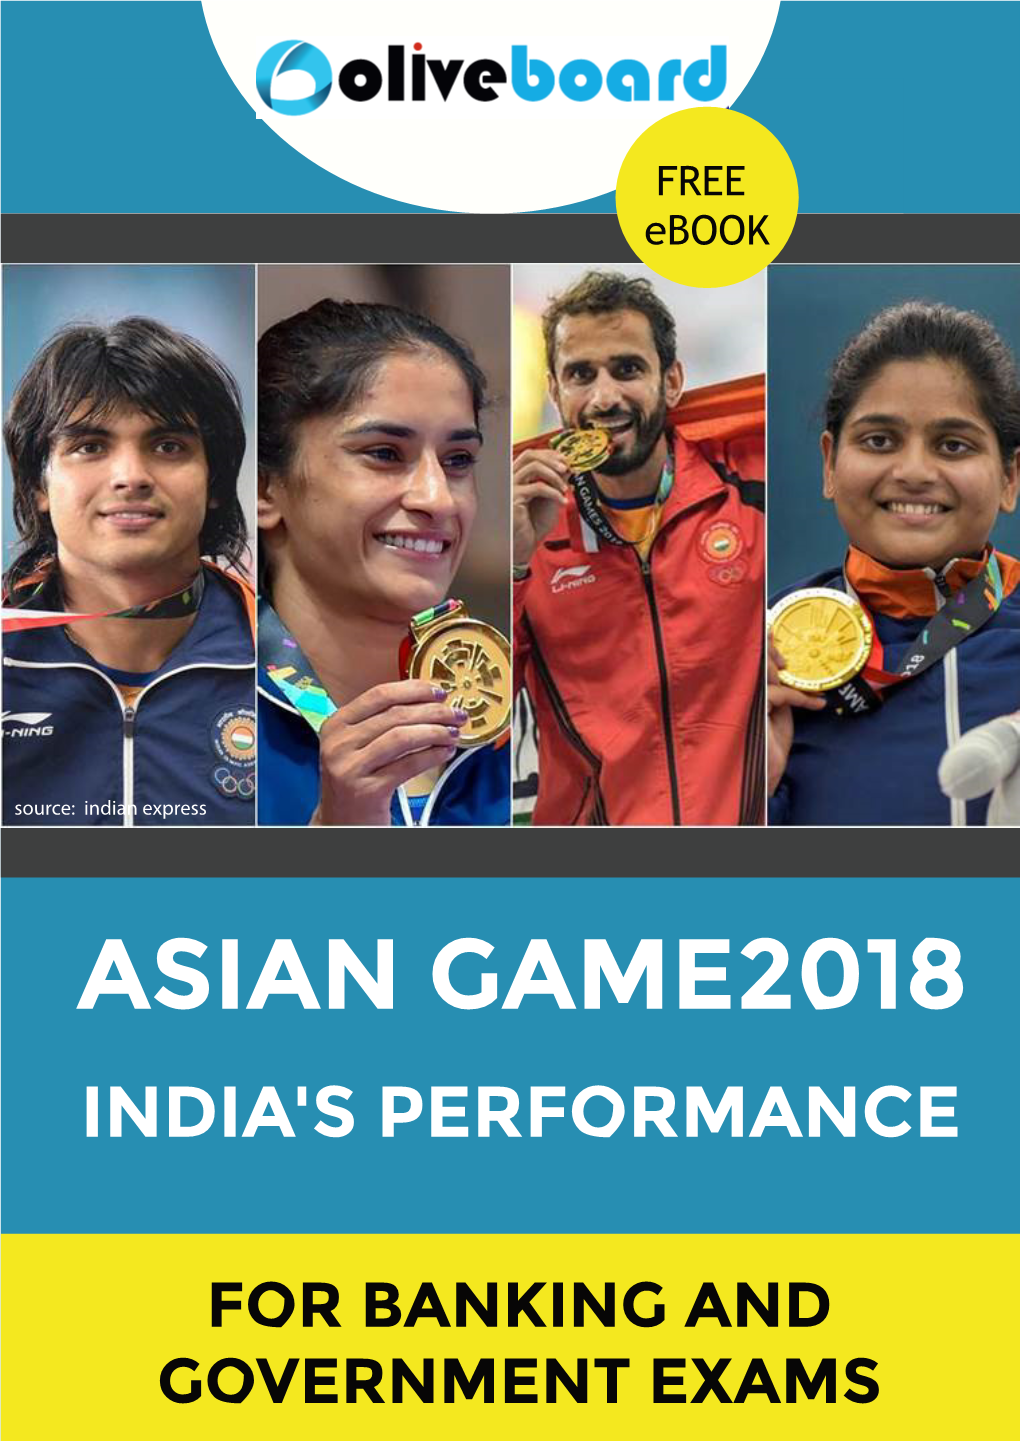 Medal Winners for India at Asian Games 2018